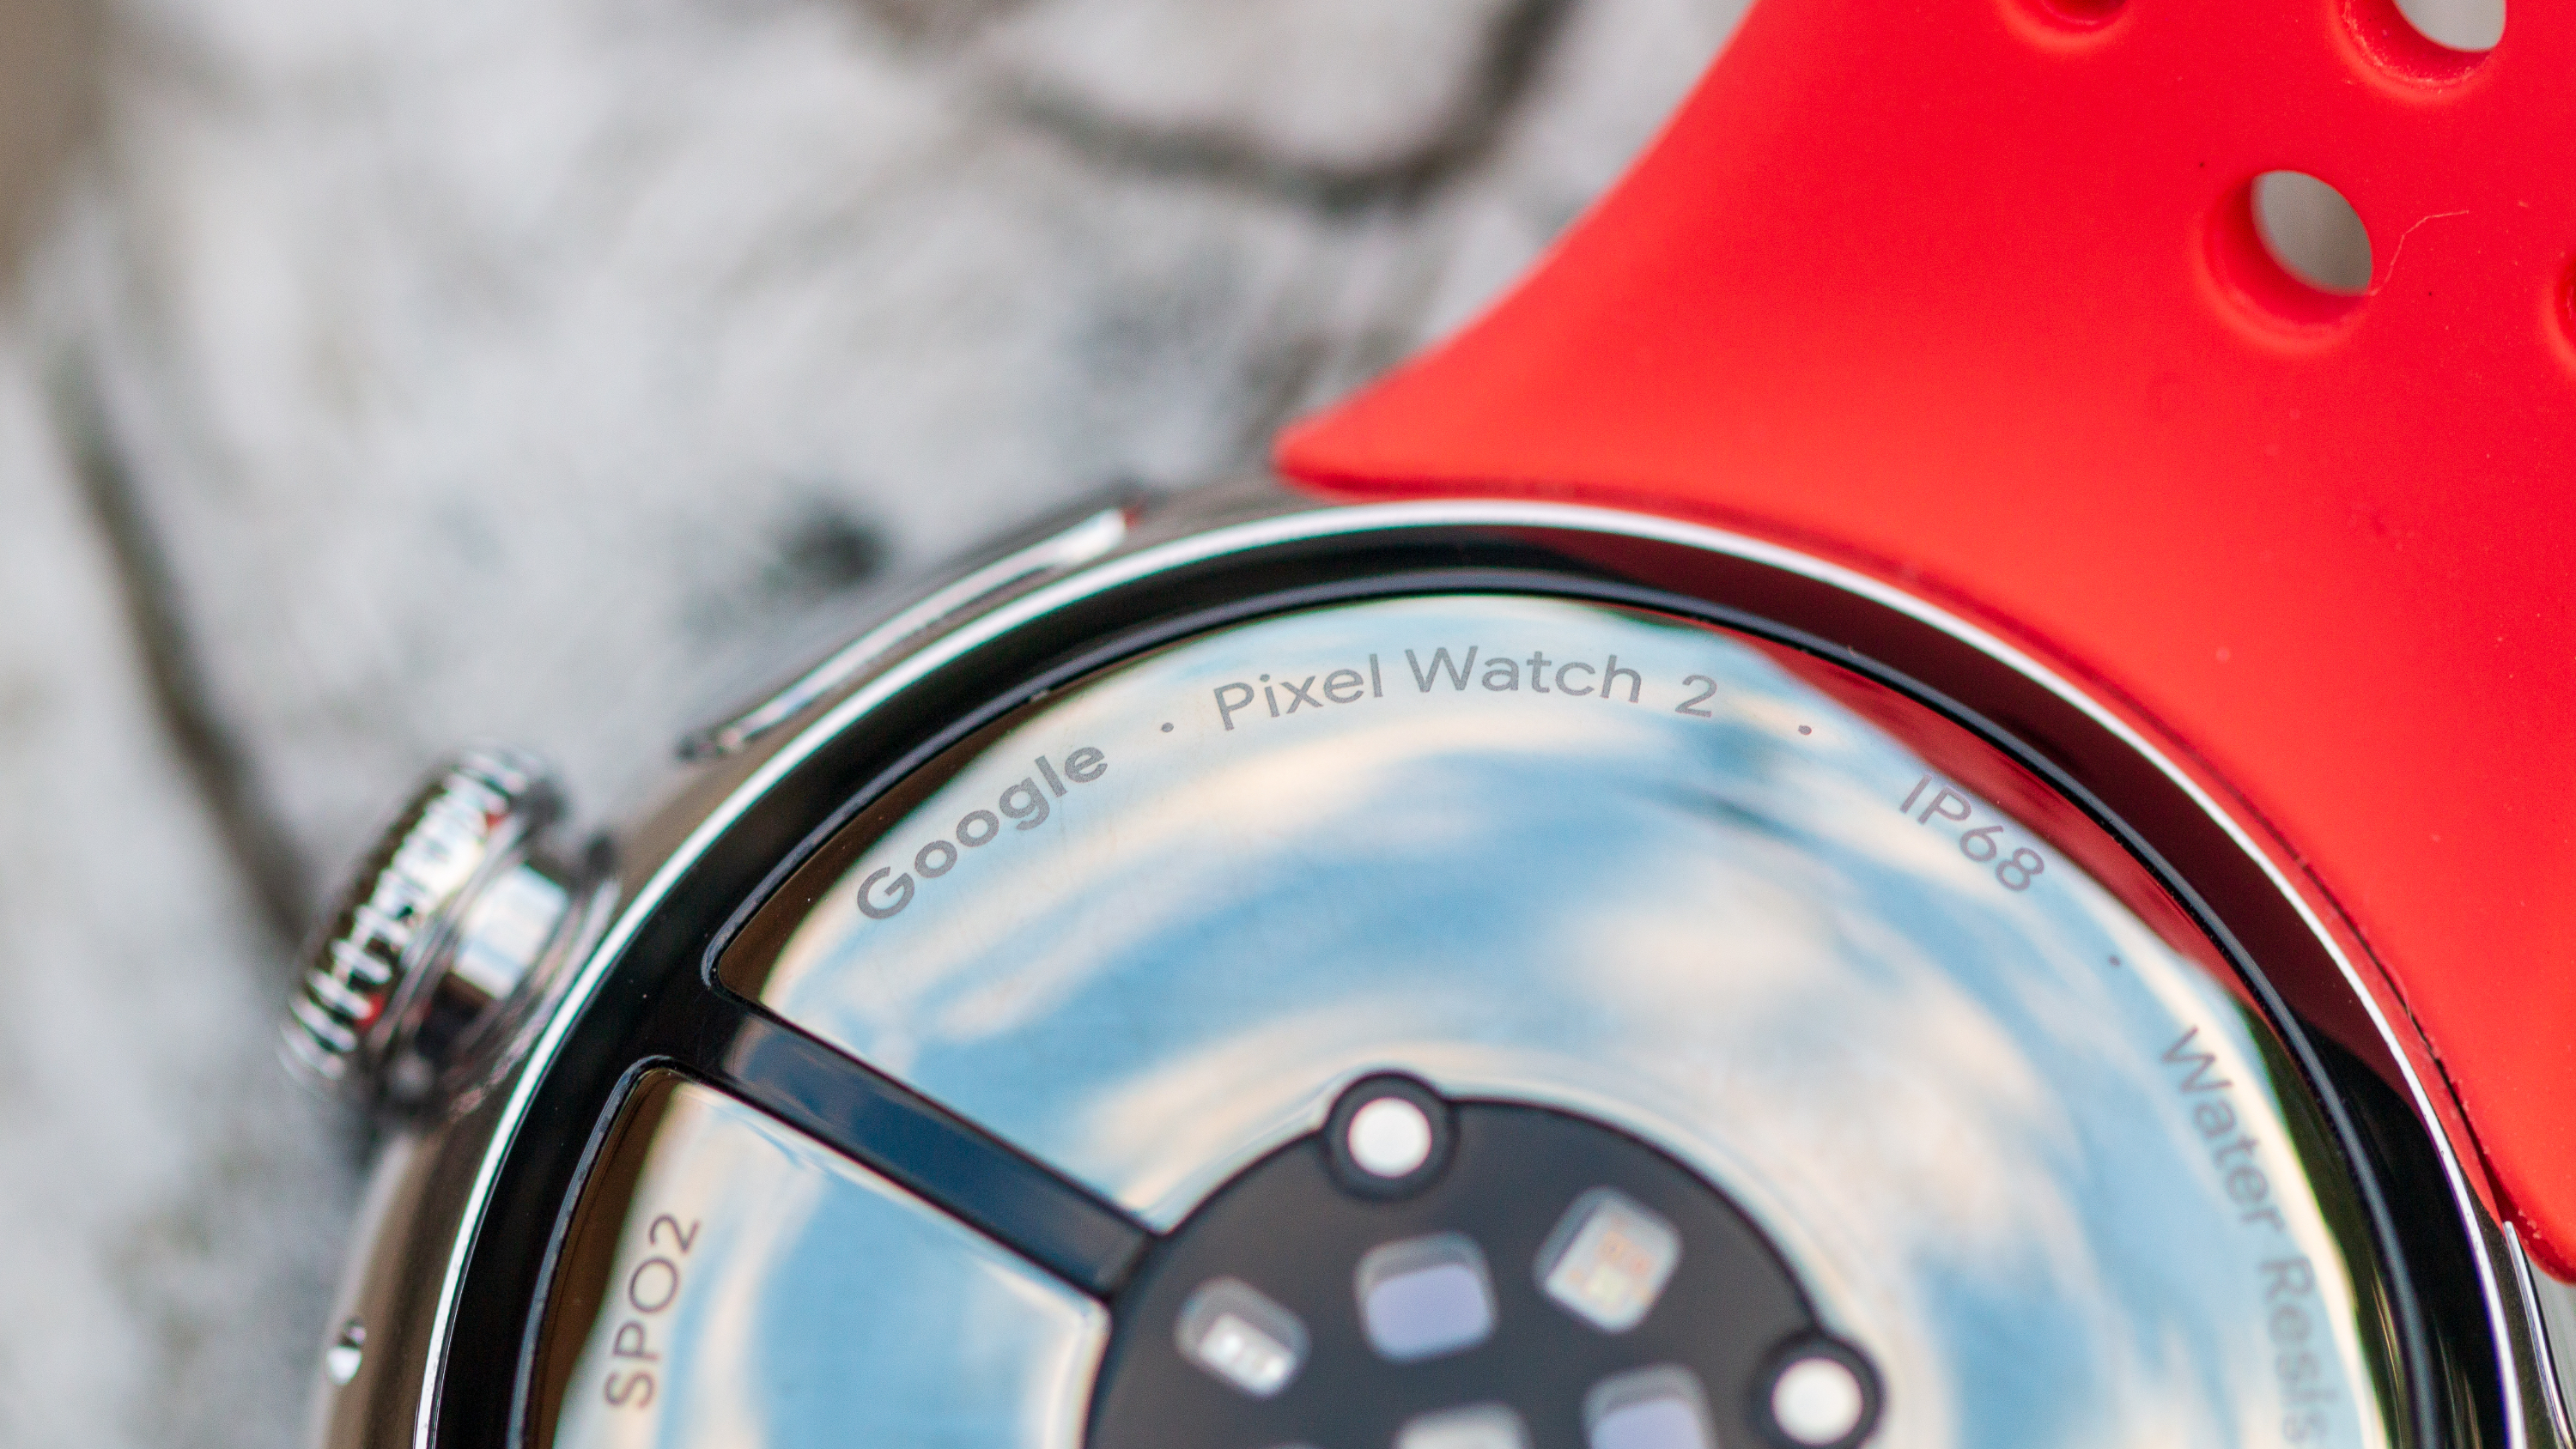 Google Pixel Watch: Release Date, Price, Specs, and News